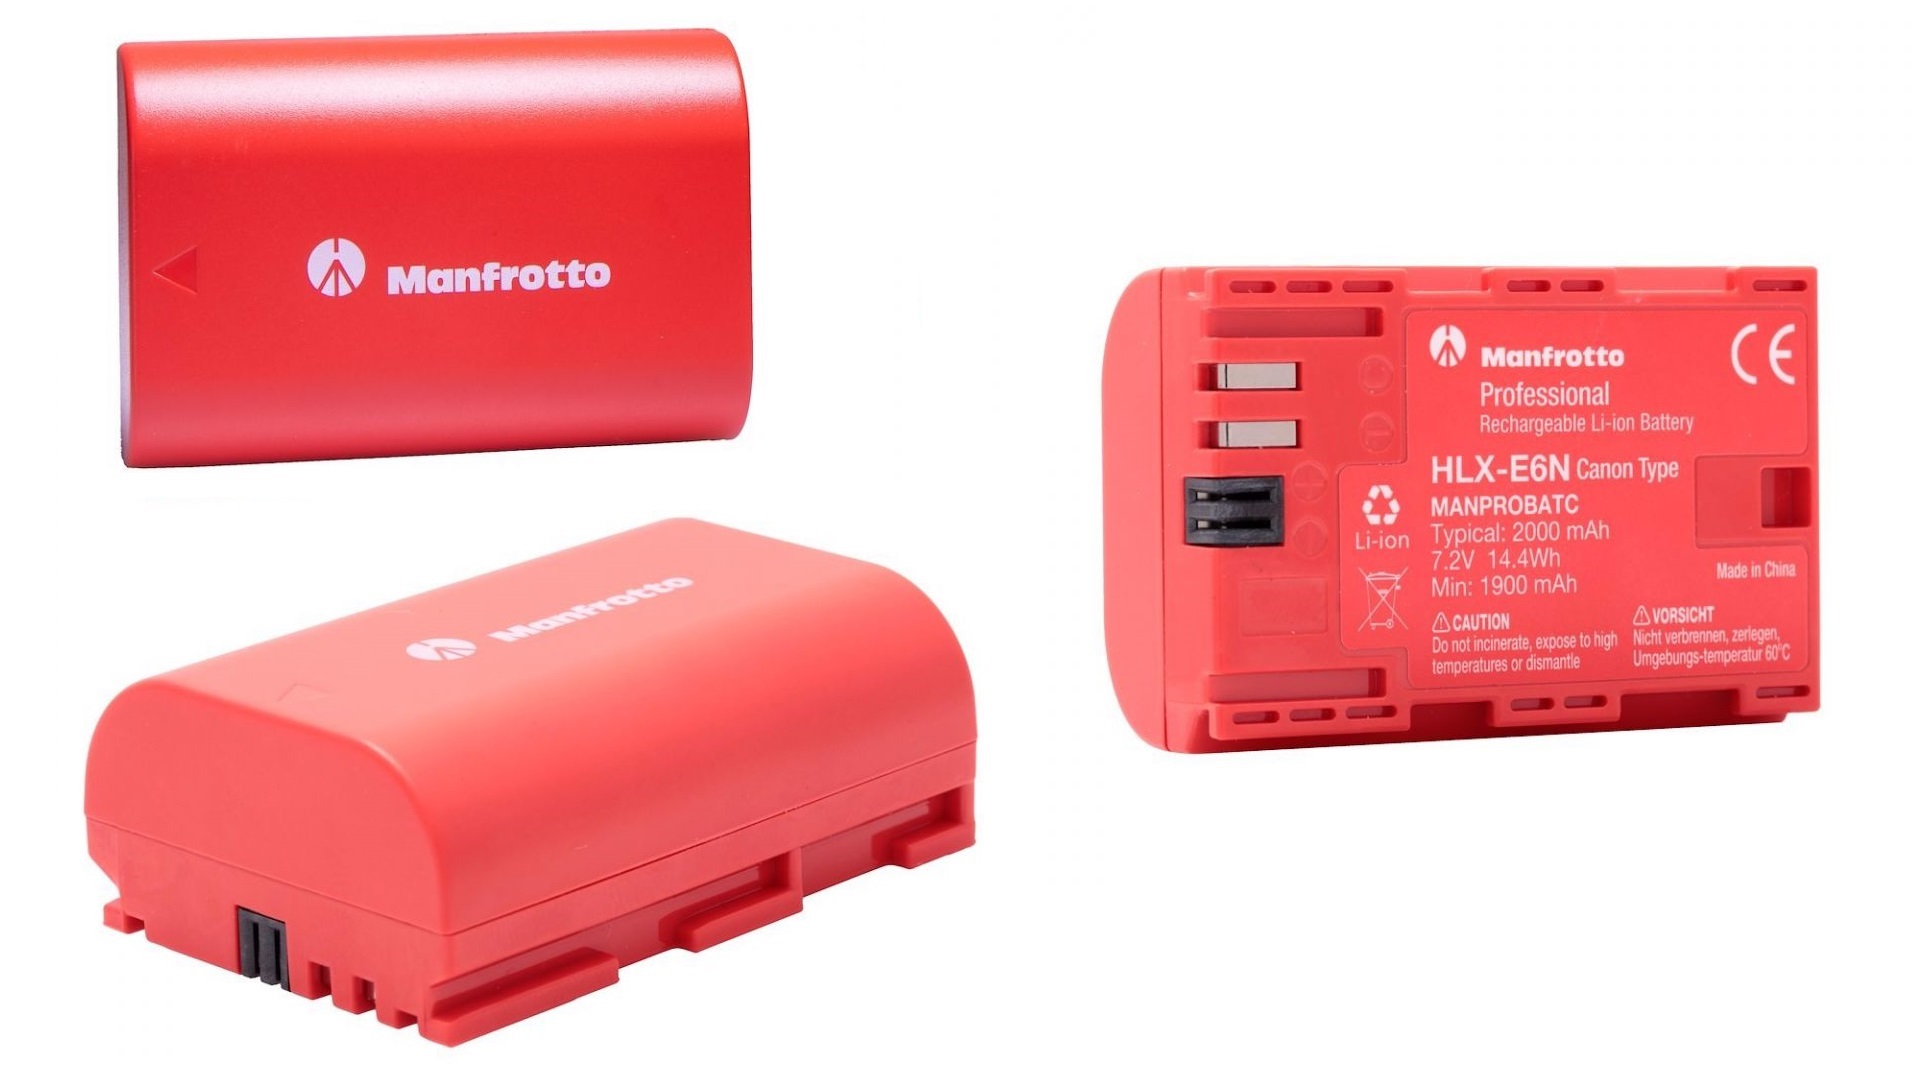 Manfrotto Announces Camera Batteries and ProCUBE Charger | CineD